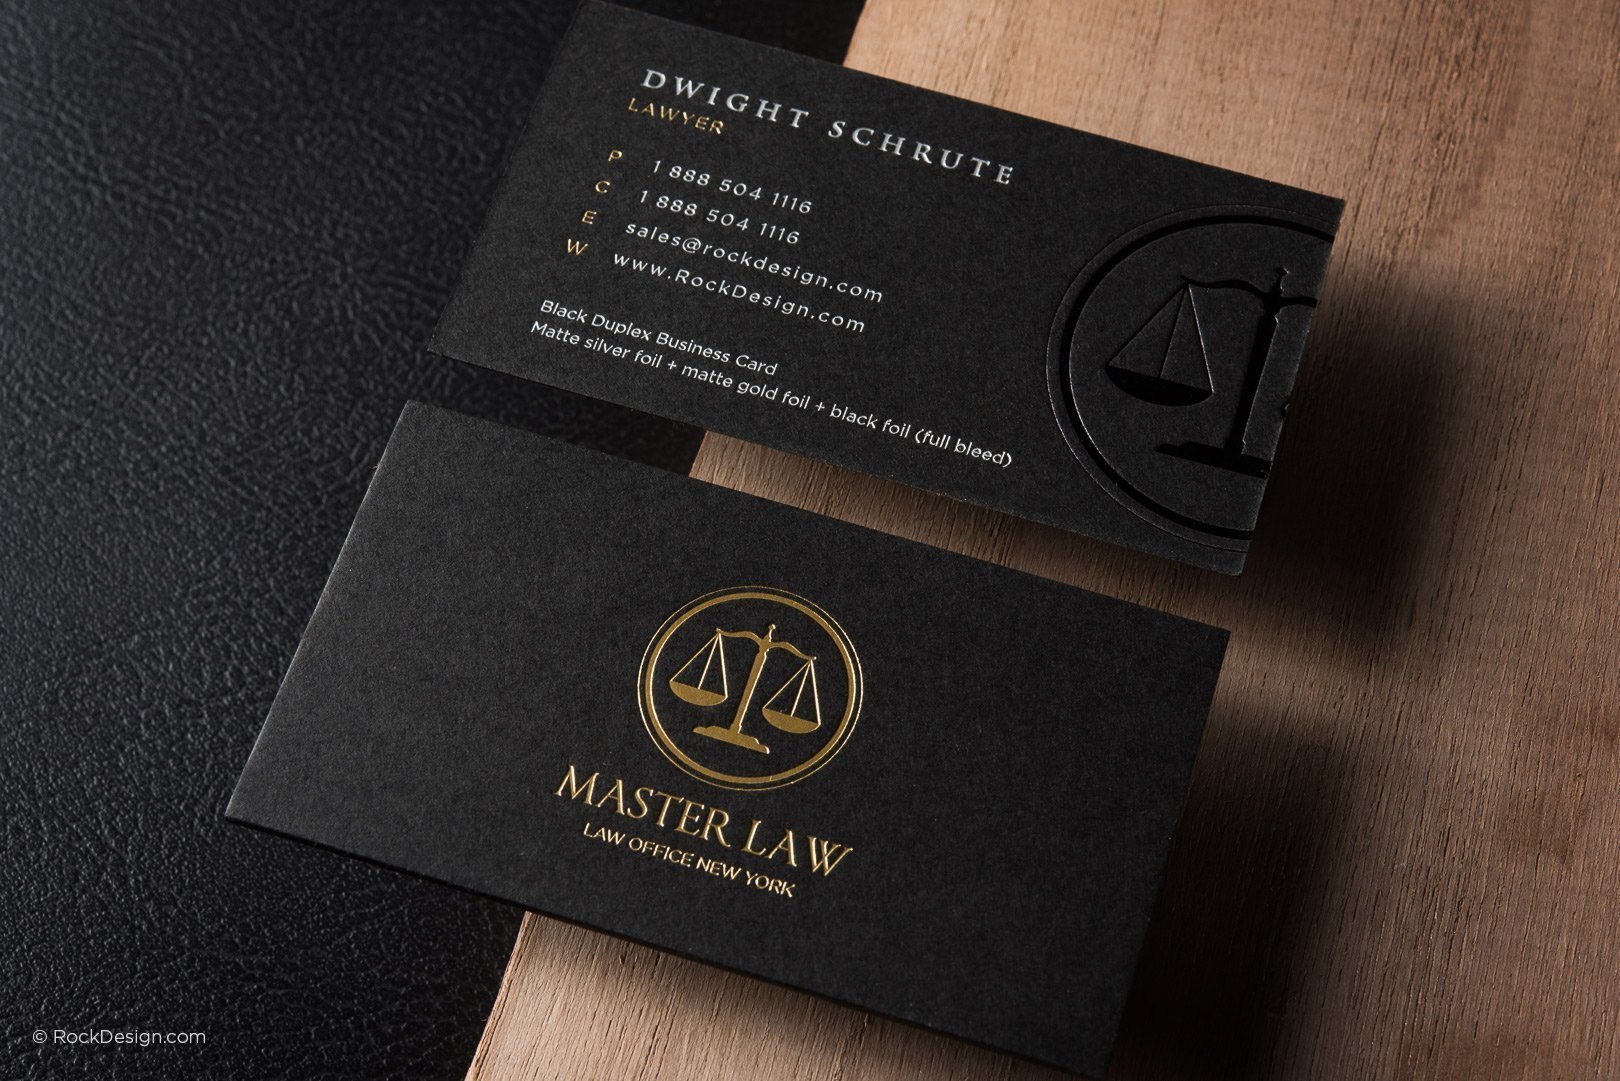 Free Lawyer Business Card Template | Rockdesign Inside Lawyer Business Cards Templates